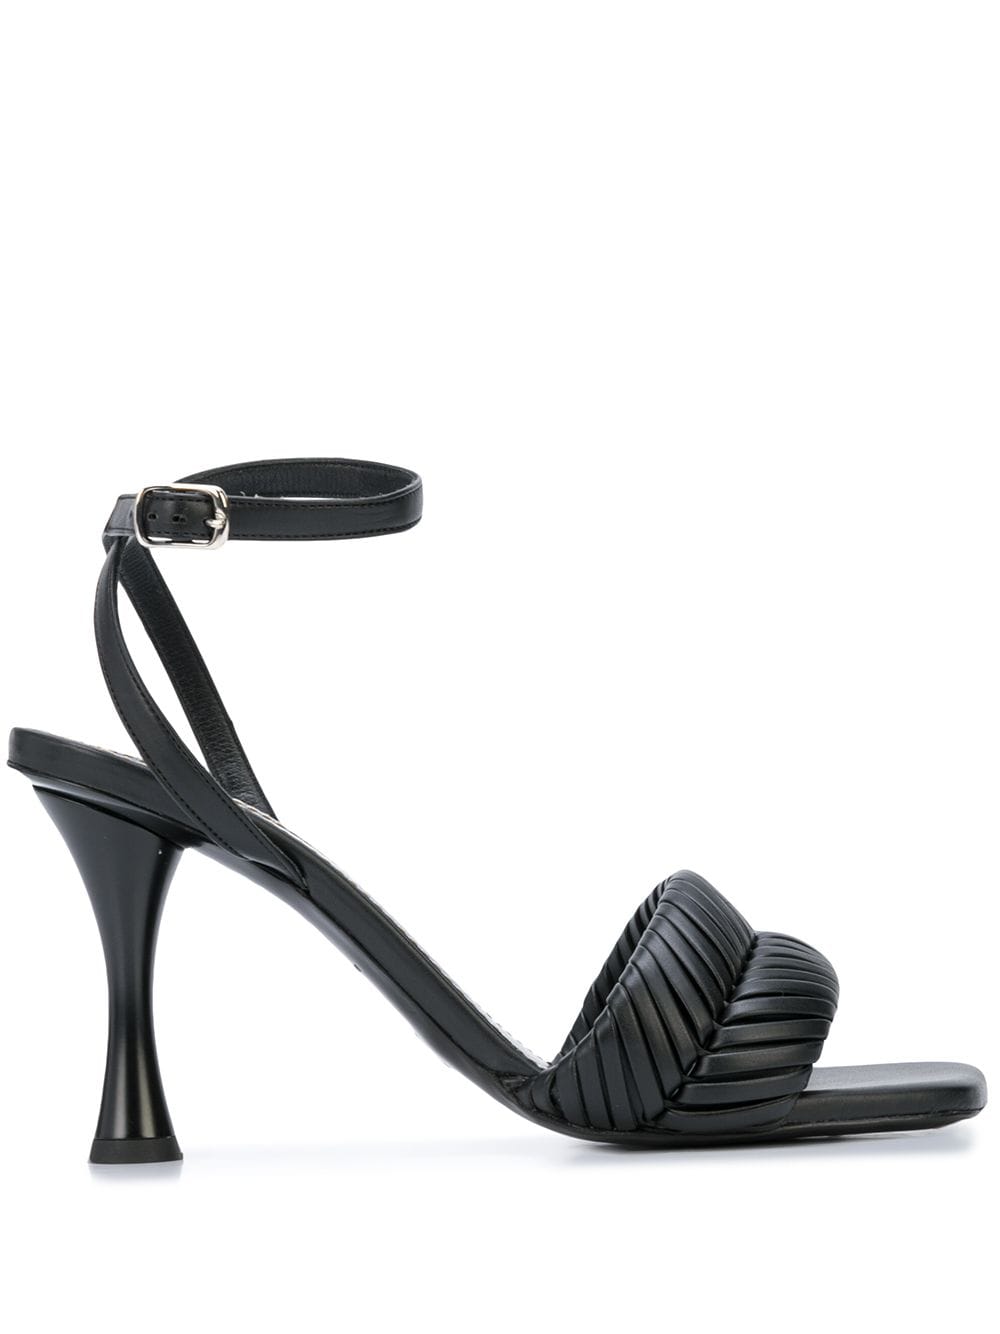 Proenza Schouler Braided Ankle Strap Sandals In Black